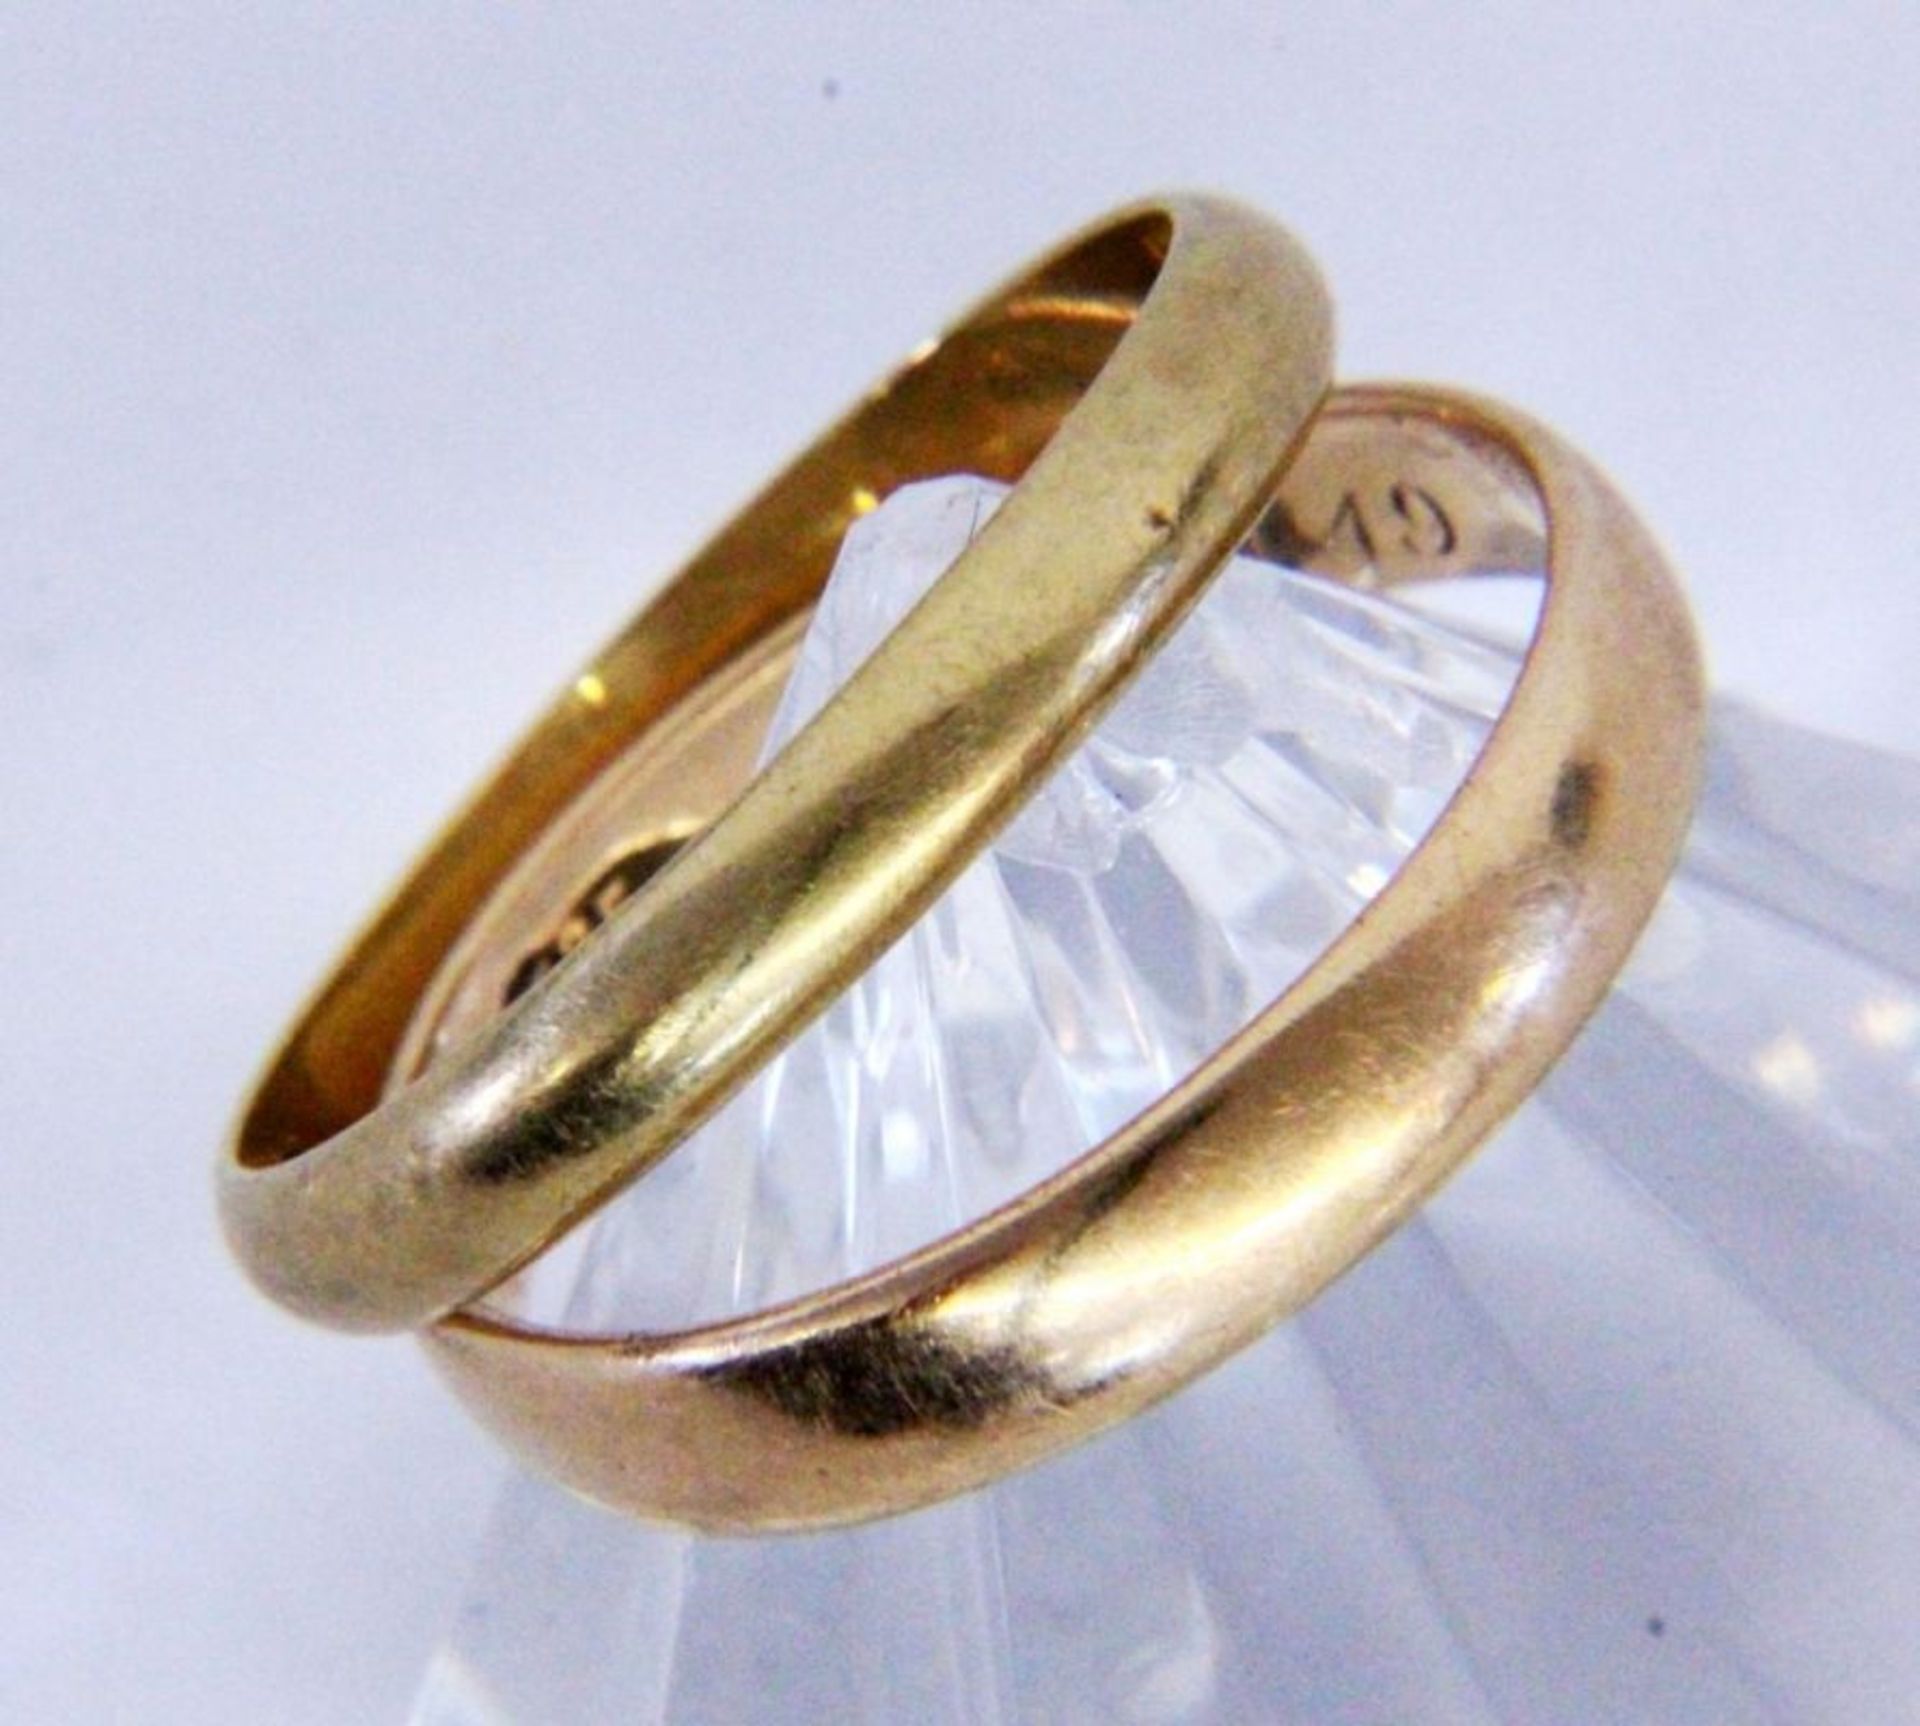 A PAIR OF WEDDING RINGS 585/000 yellow gold. Ring size 58, gross weight approx. 5 grams.